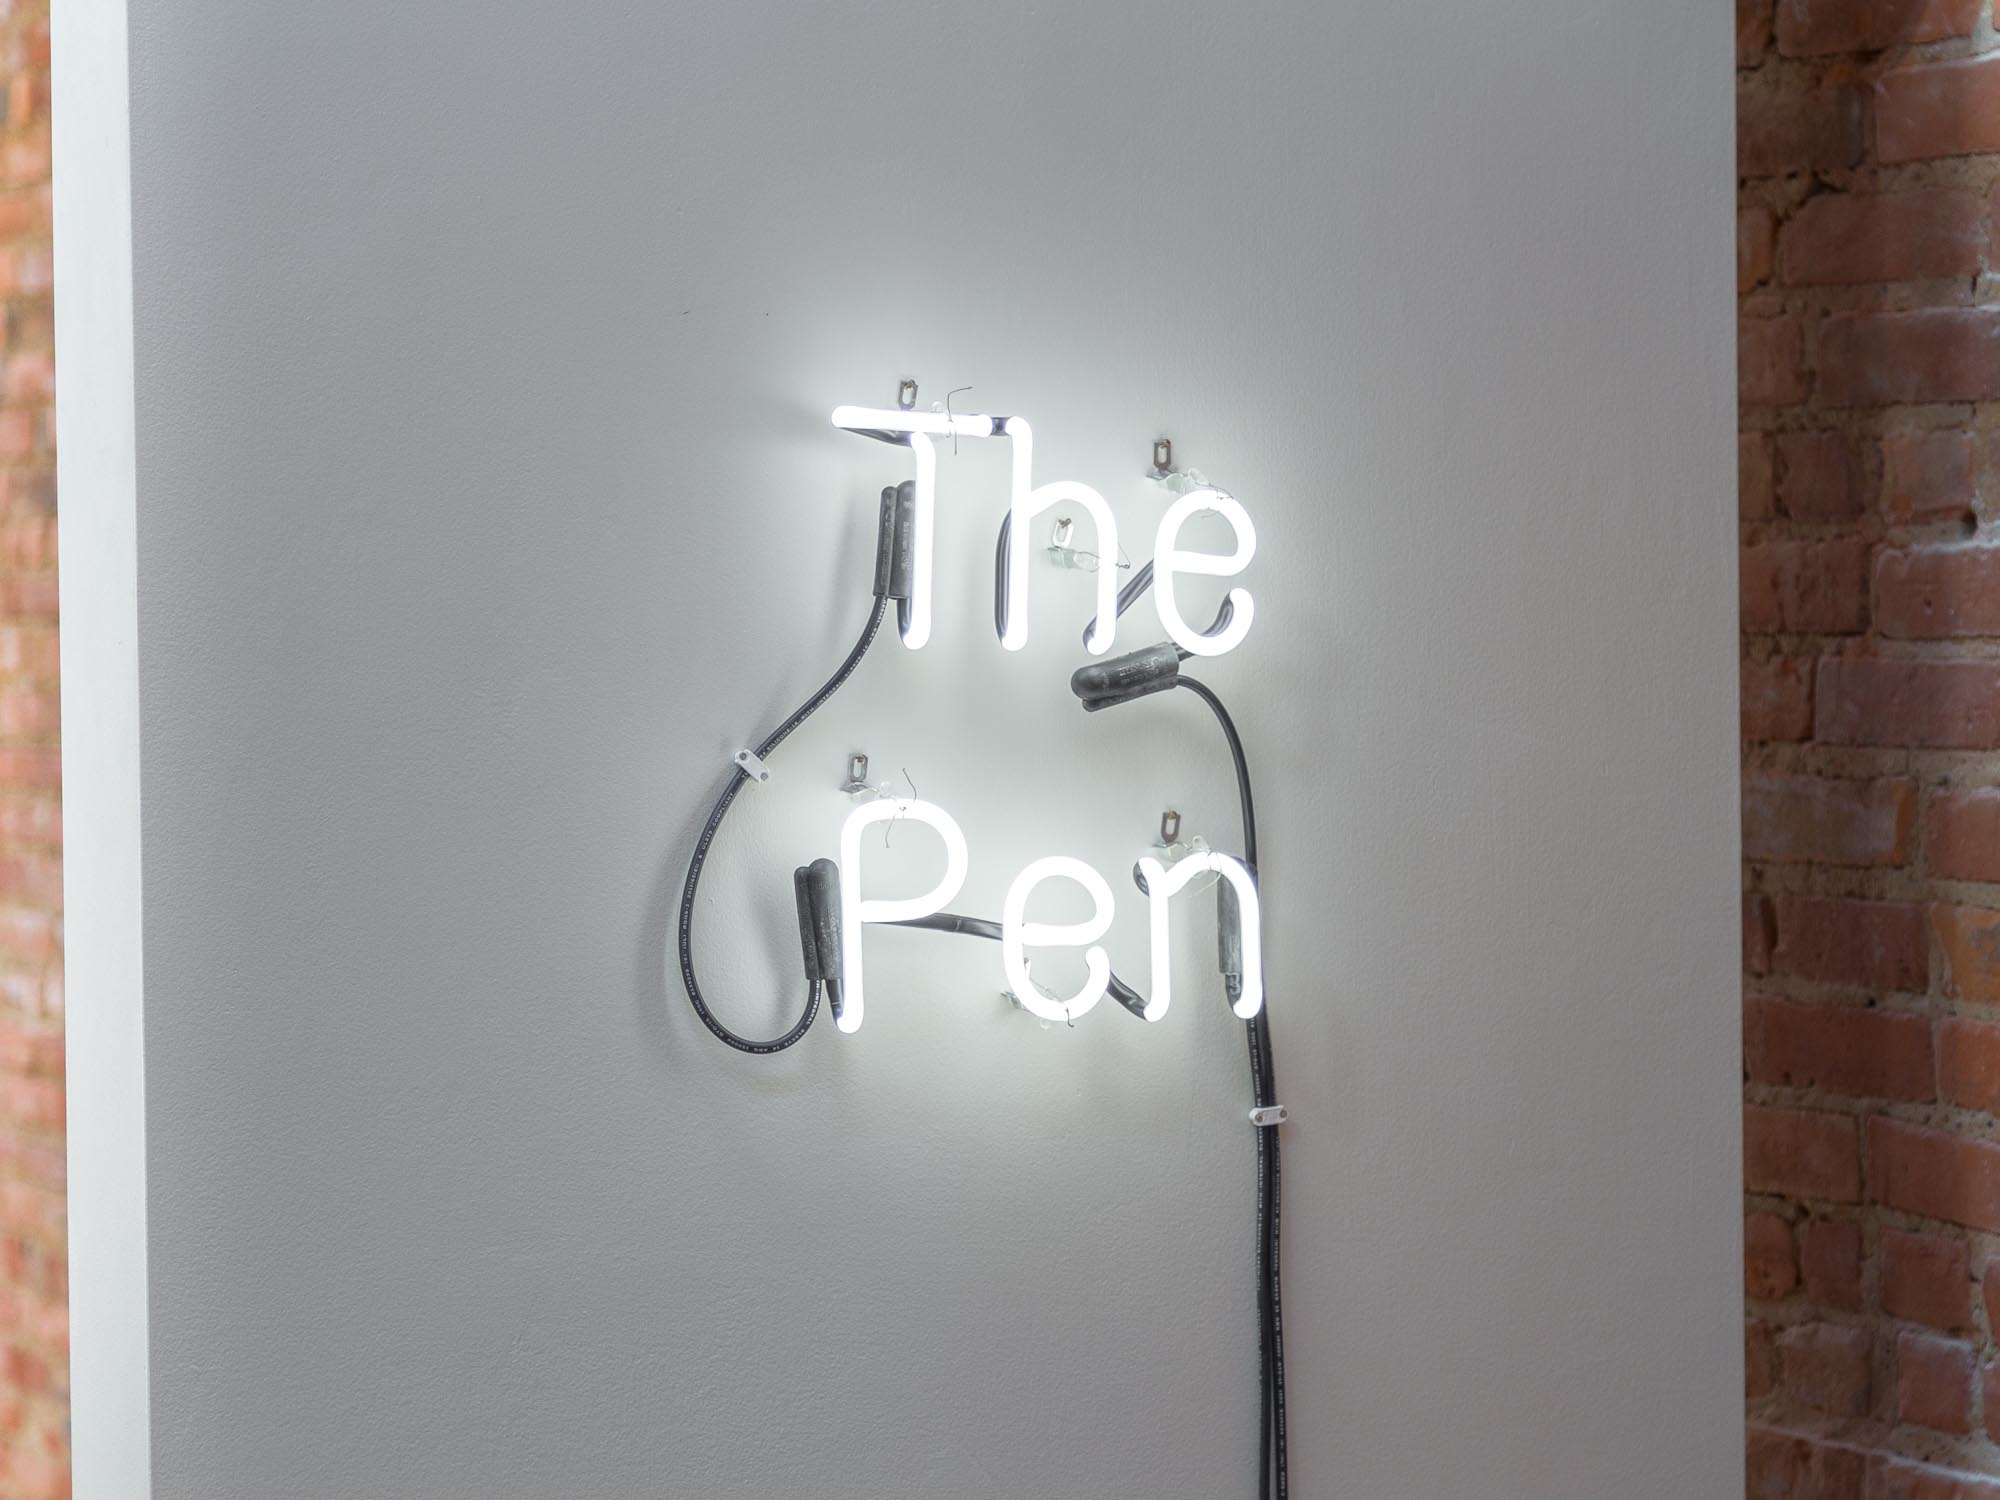 Anthony Warnick, The Pen 2018 Neon 12